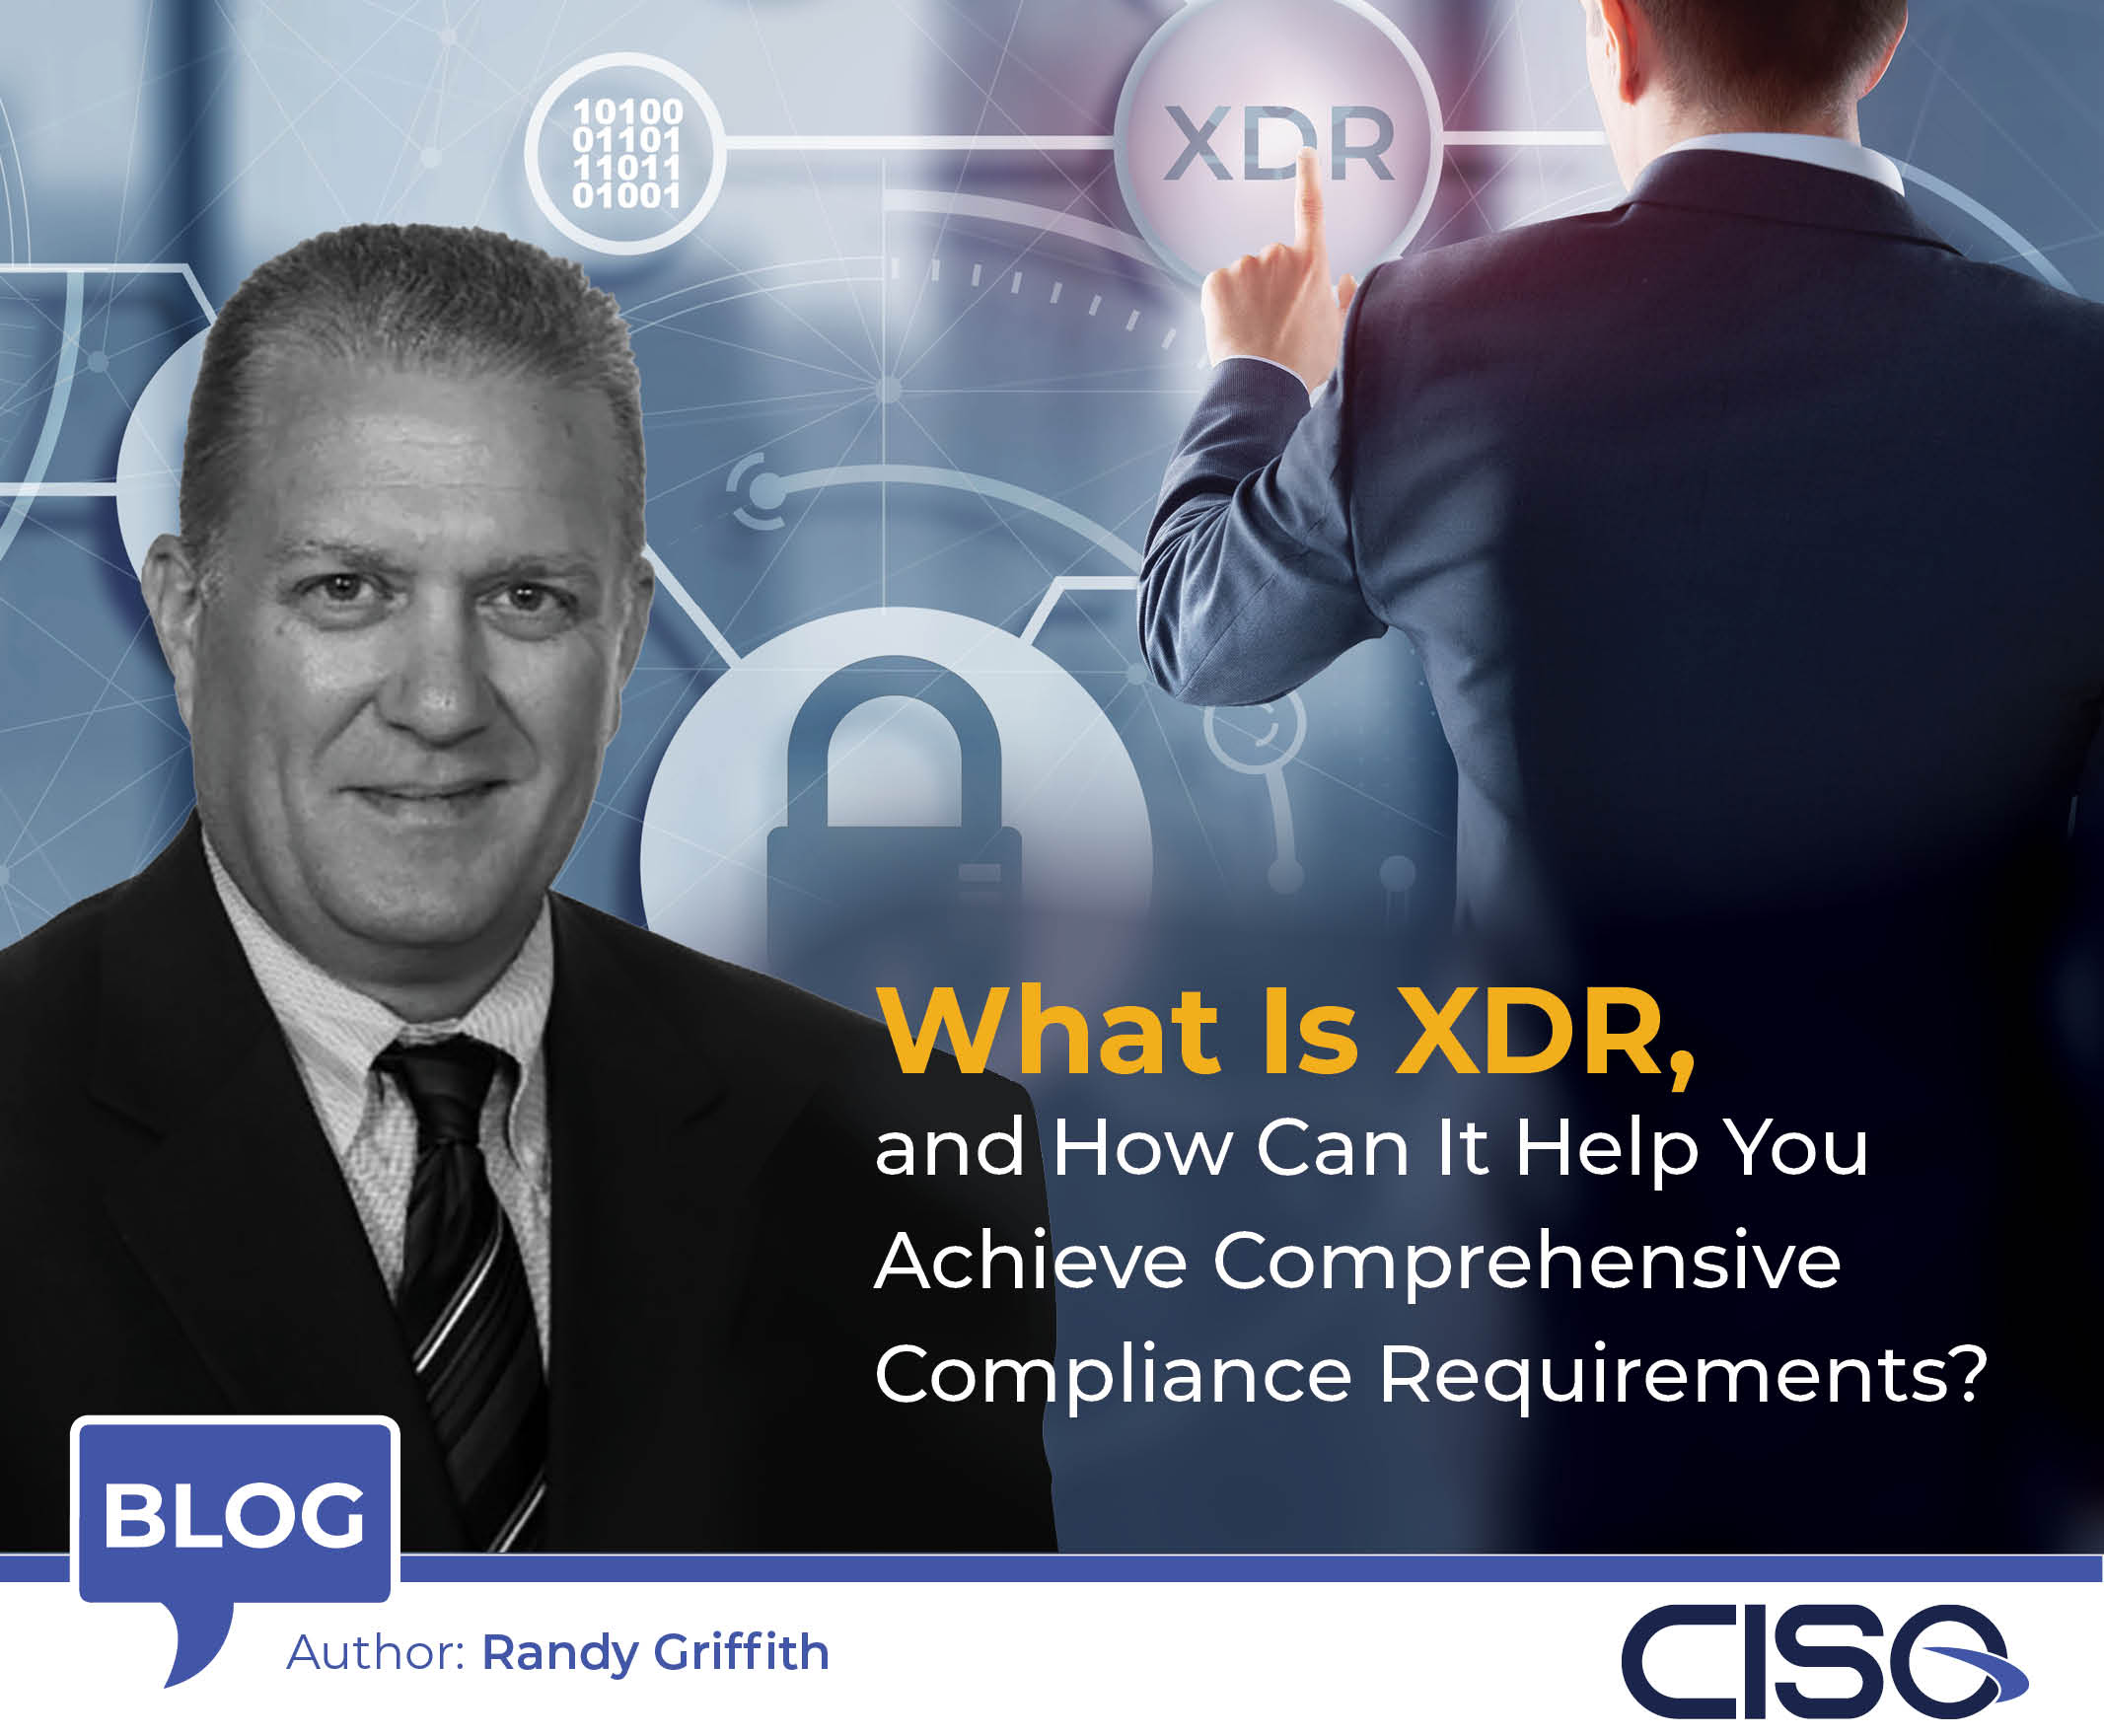 What Is XDR, and How Can It Help You Achieve Comprehensive Compliance Requirements?